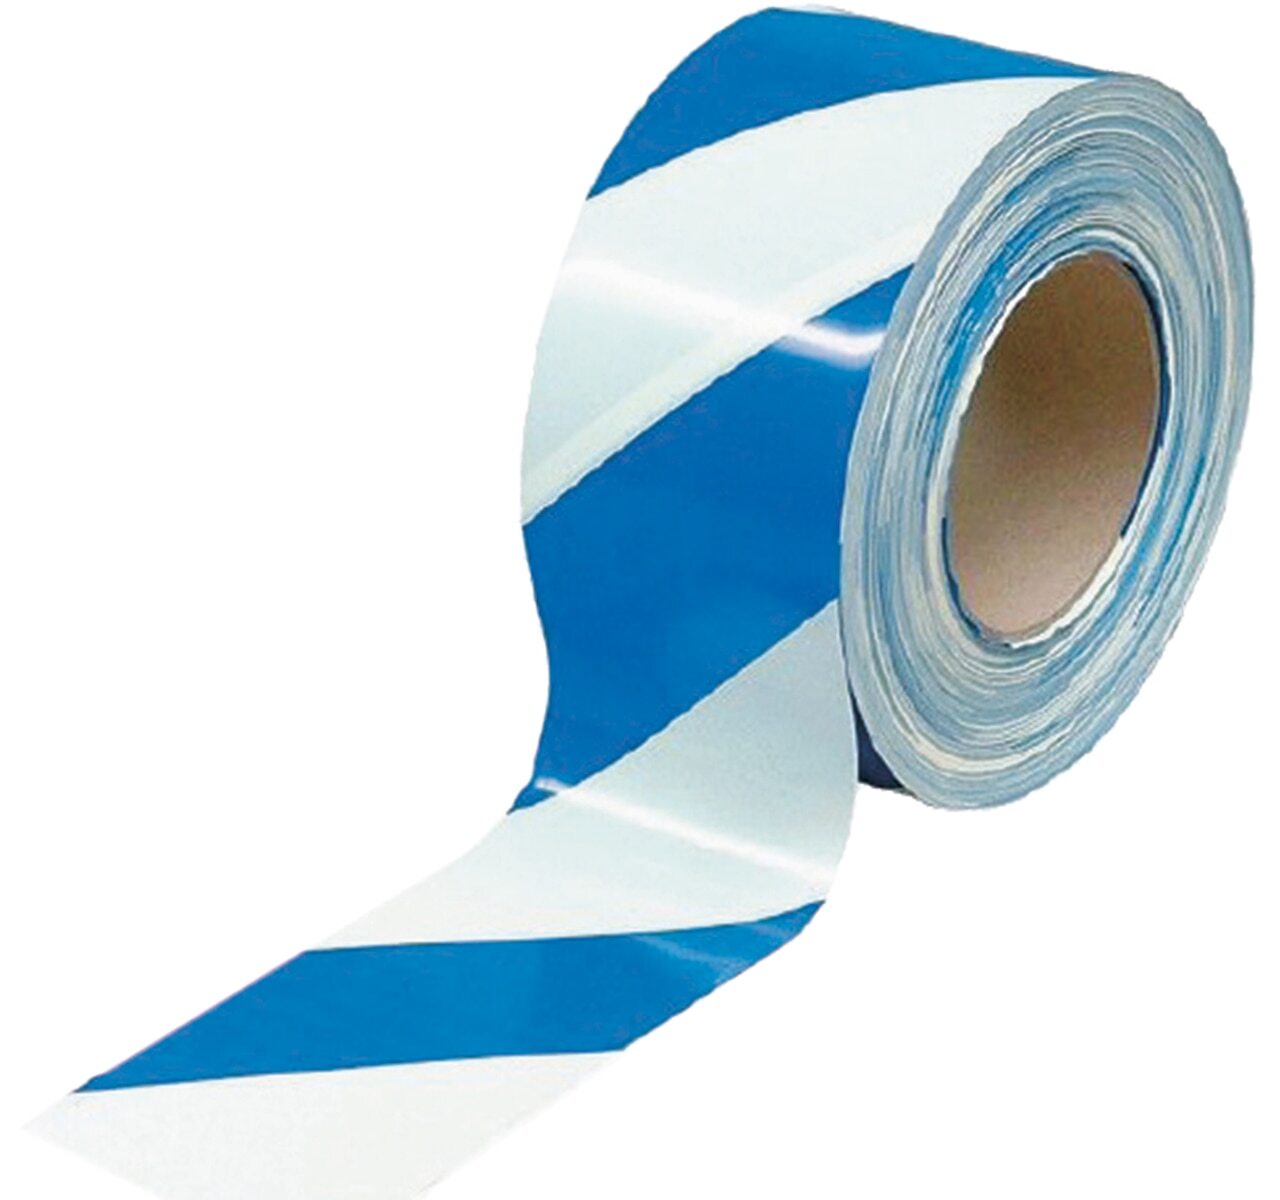 10 Metre Workplace Safety Reflective Tape - Blue & White